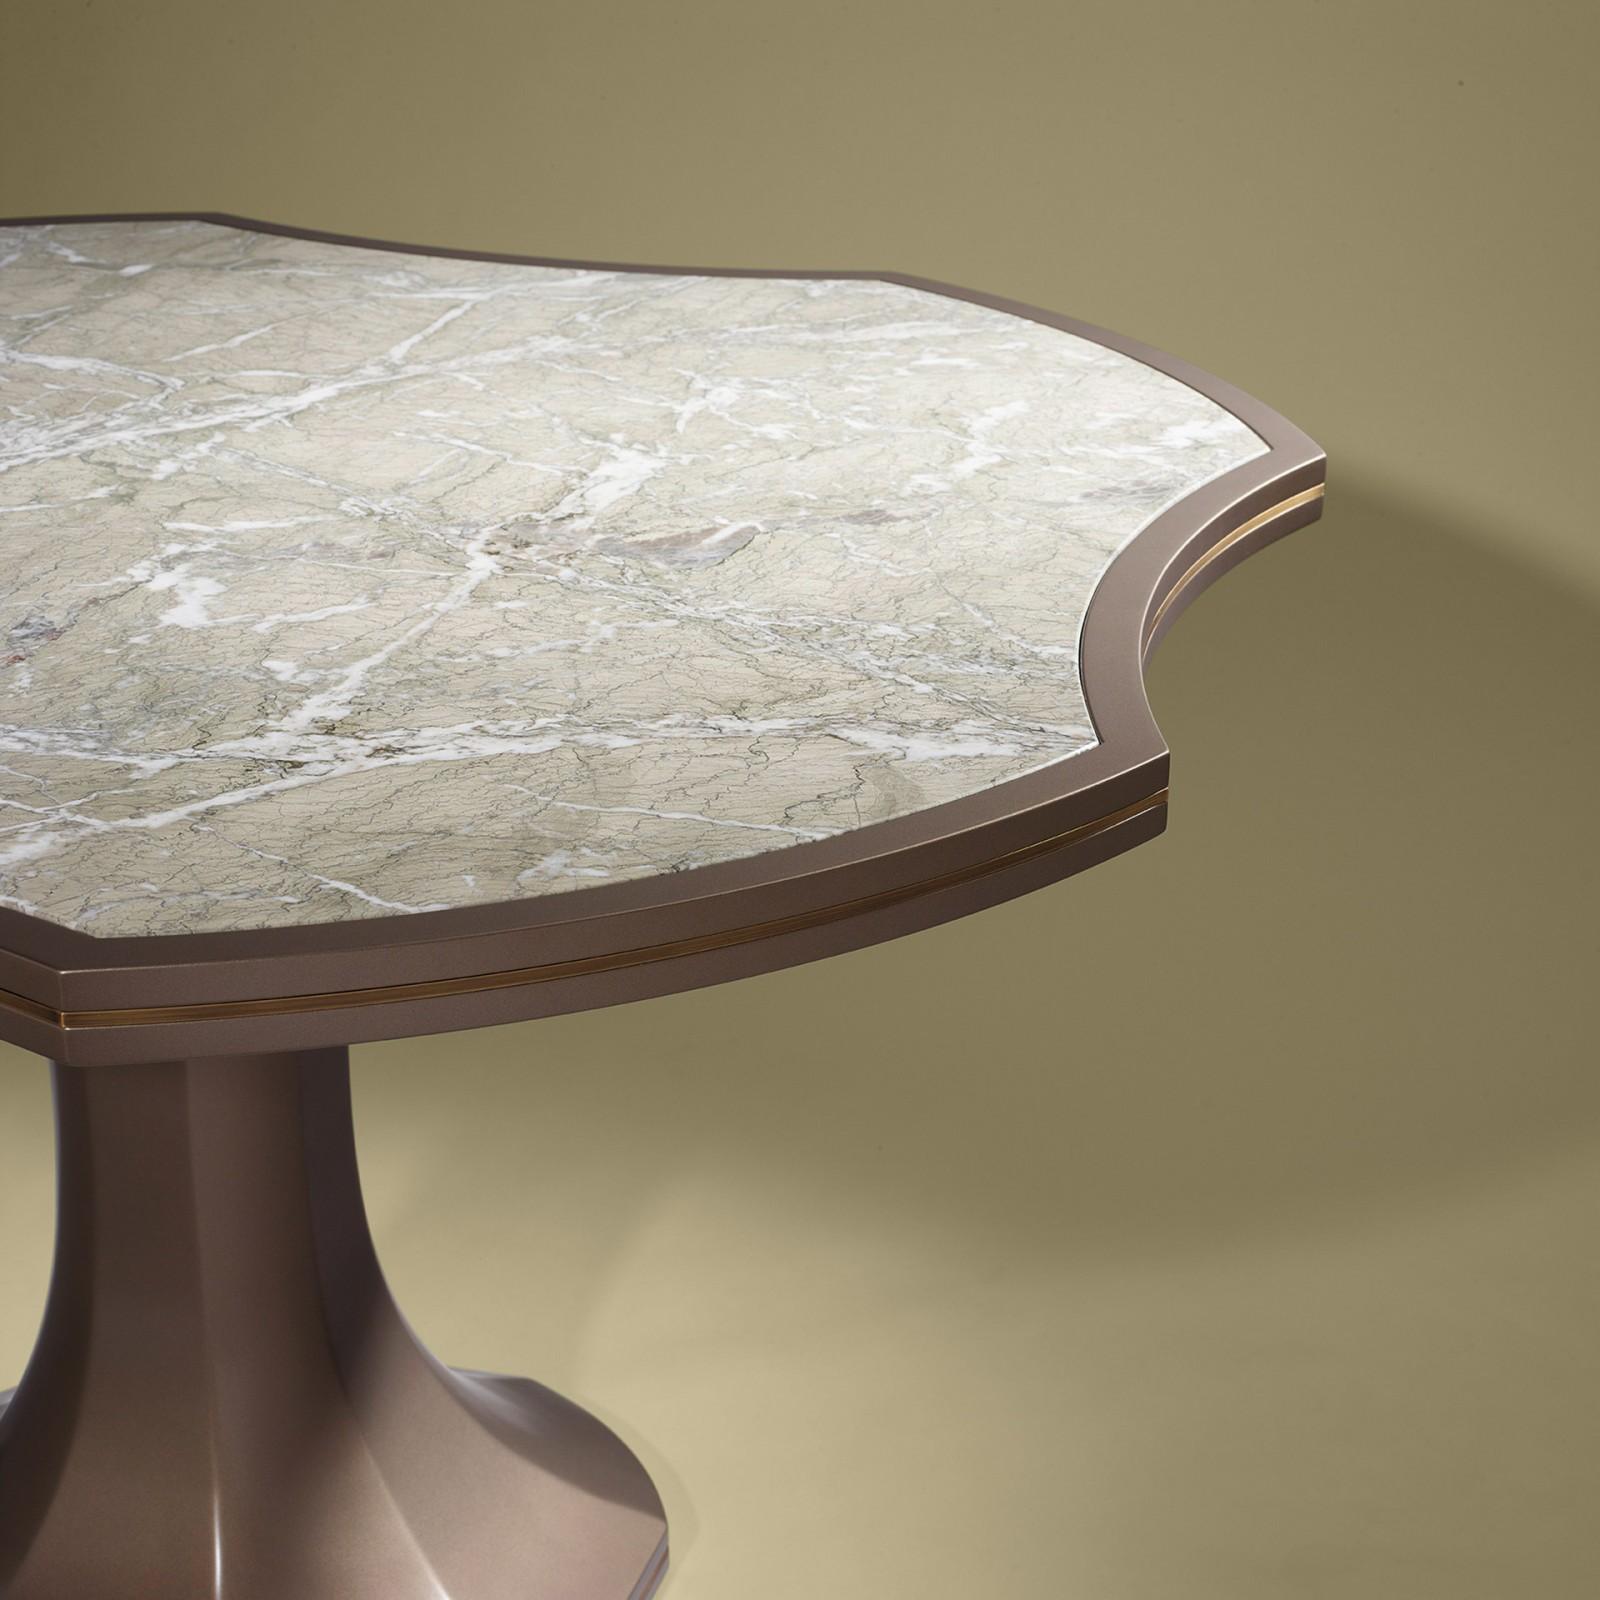 Table lacquer with bronze details and stone marble top.

Bespoke / customizable
Identical shapes with different sizes and finishings.
All RAL colors available. (Mate / half gloss / gloss).